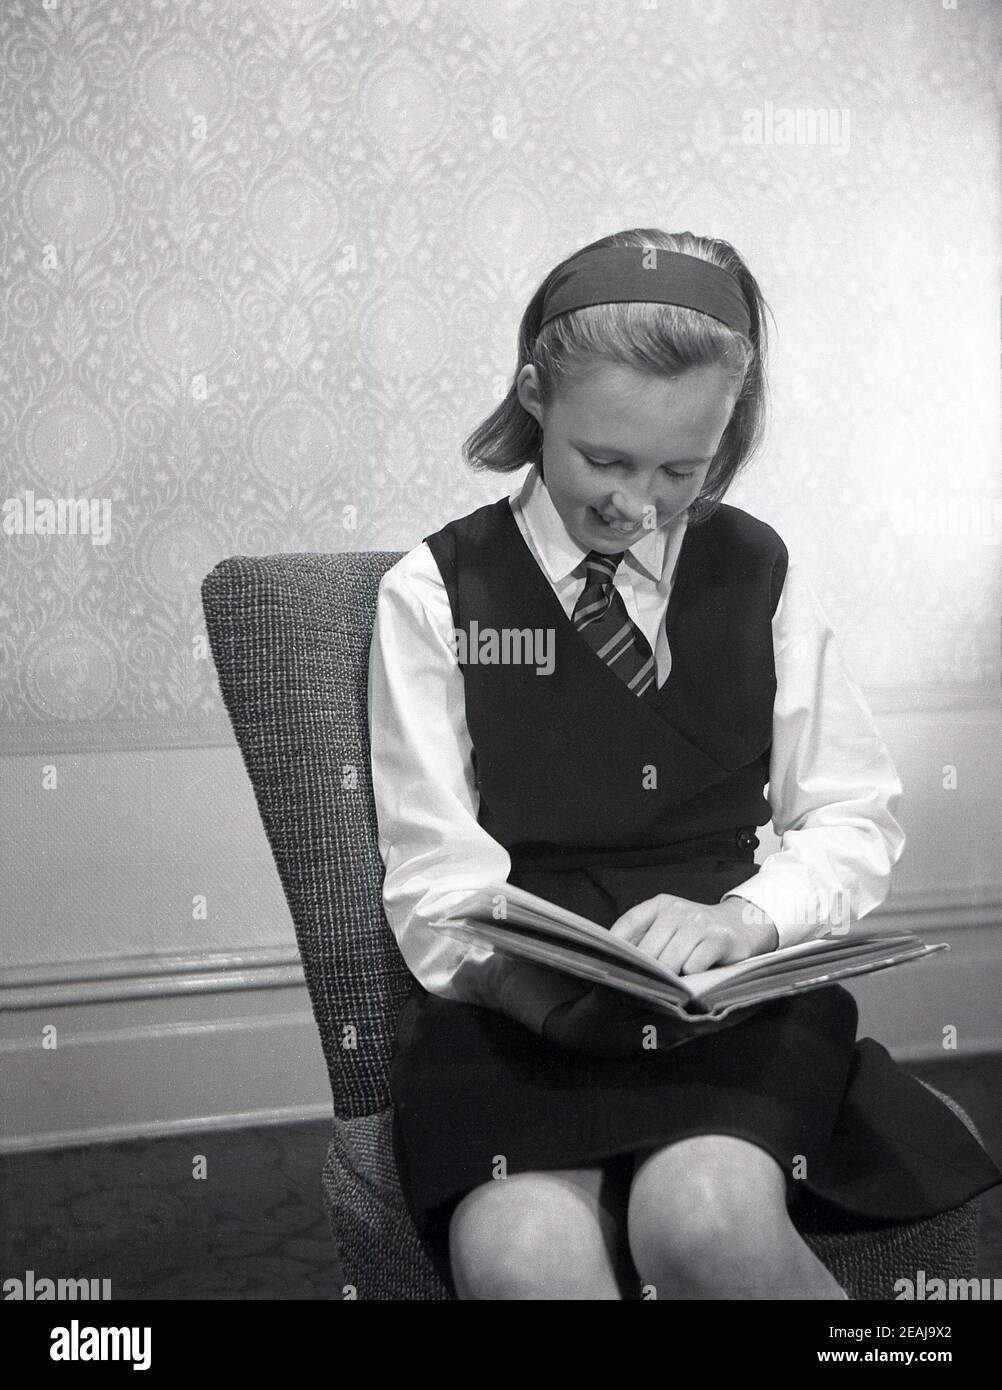 1950s, historical, a teenage schoolgirl in her uniform sitting in a room on a small chair reading or studying a book, England, UK. Stock Photo